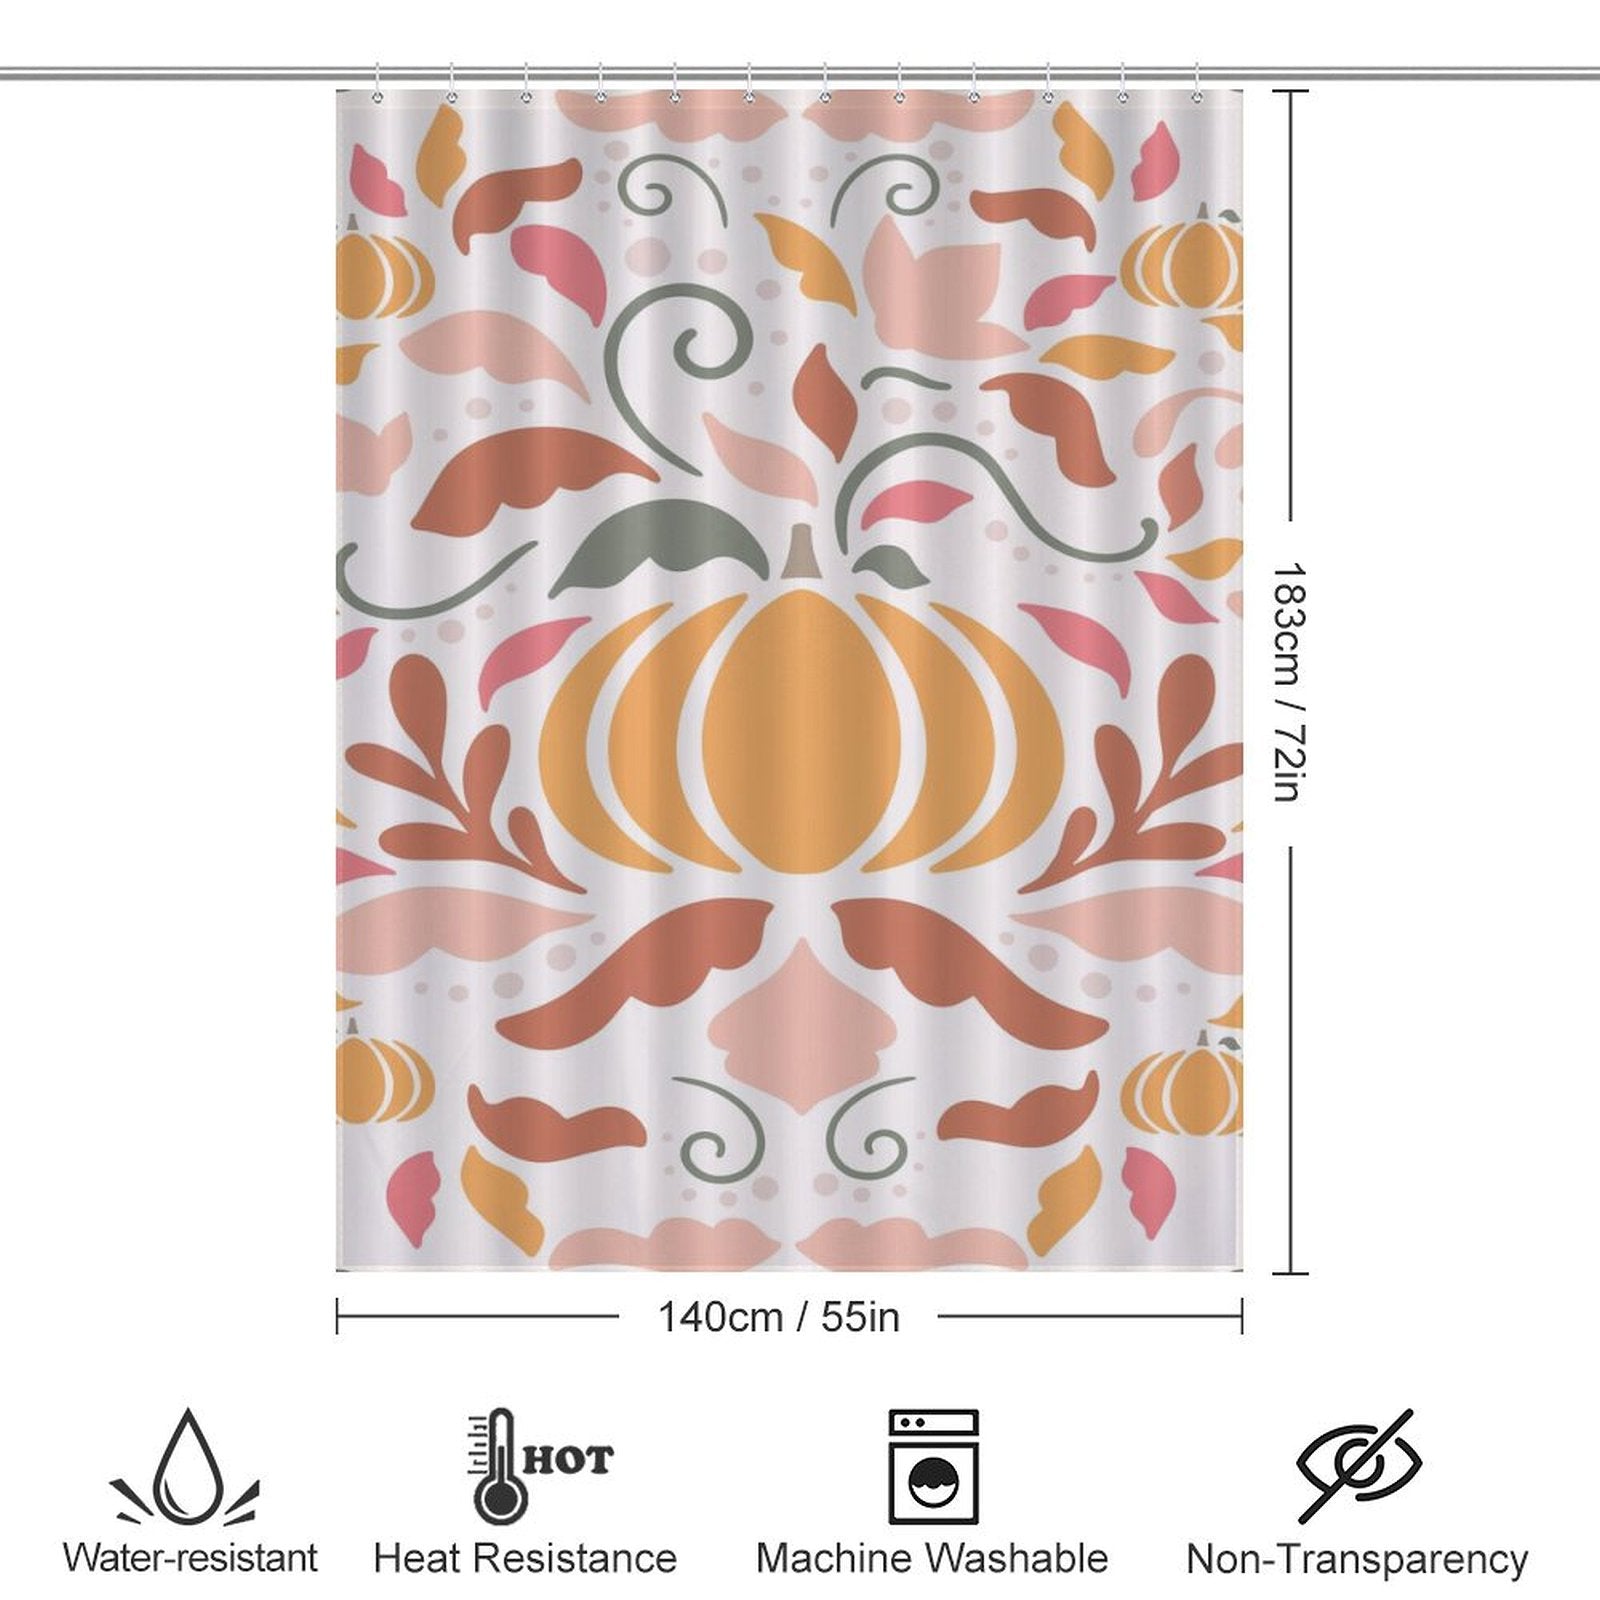 A **Boho Fall Pumpkins Pink Floral Shower Curtain-Cottoncat** with a Boho Fall Pumpkins design, measuring 140cm x 183cm. The curtain is water-resistant, heat-resistant, machine washable, and non-transparent. This product is by **Cotton Cat**.